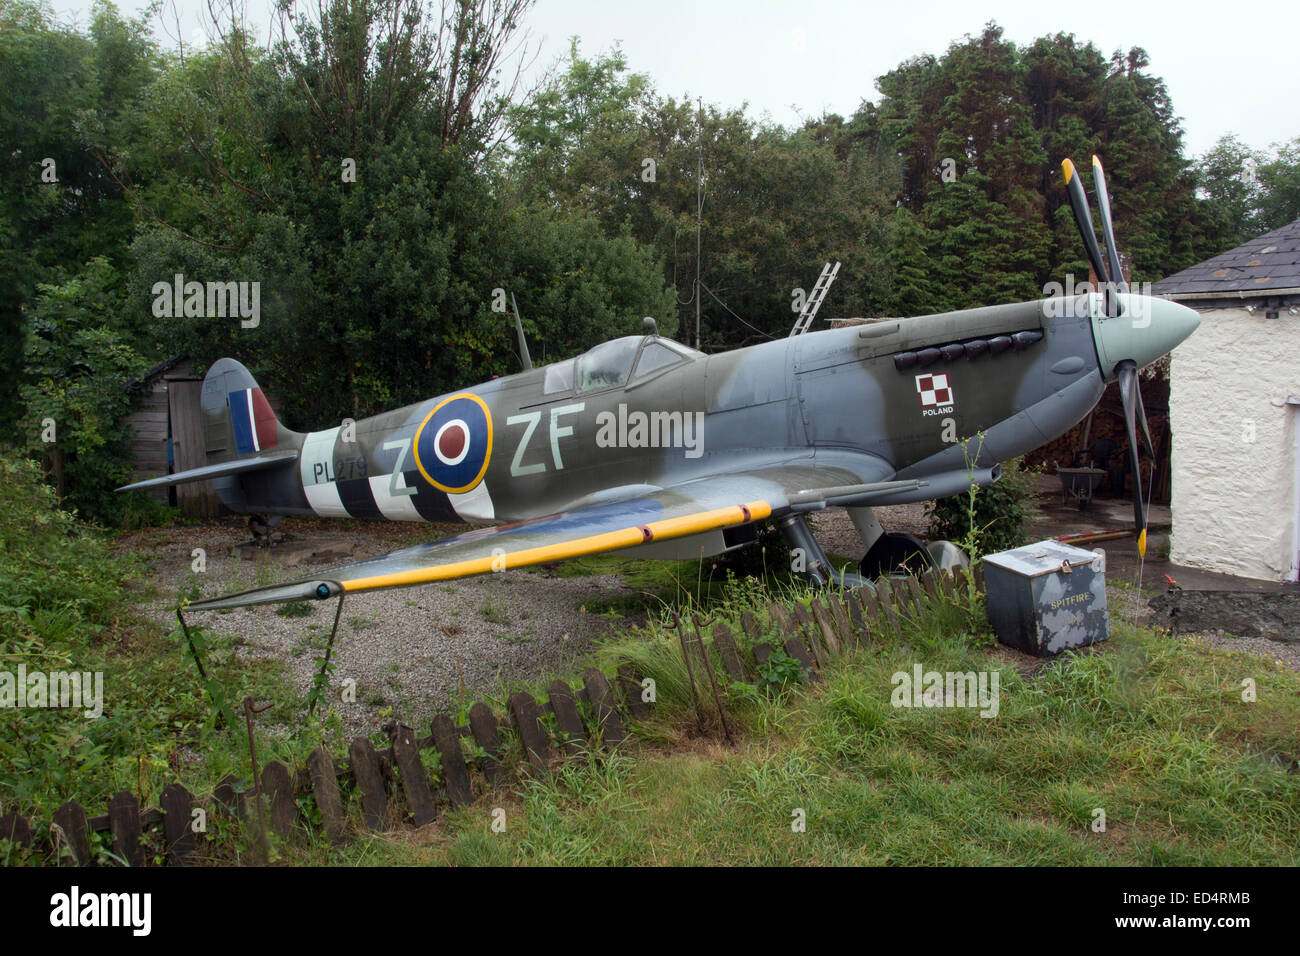 CORNWALL ; NR.PADSTOW AIR FORCE BASE, SPITFIRE ET DONATION BOX Banque D'Images